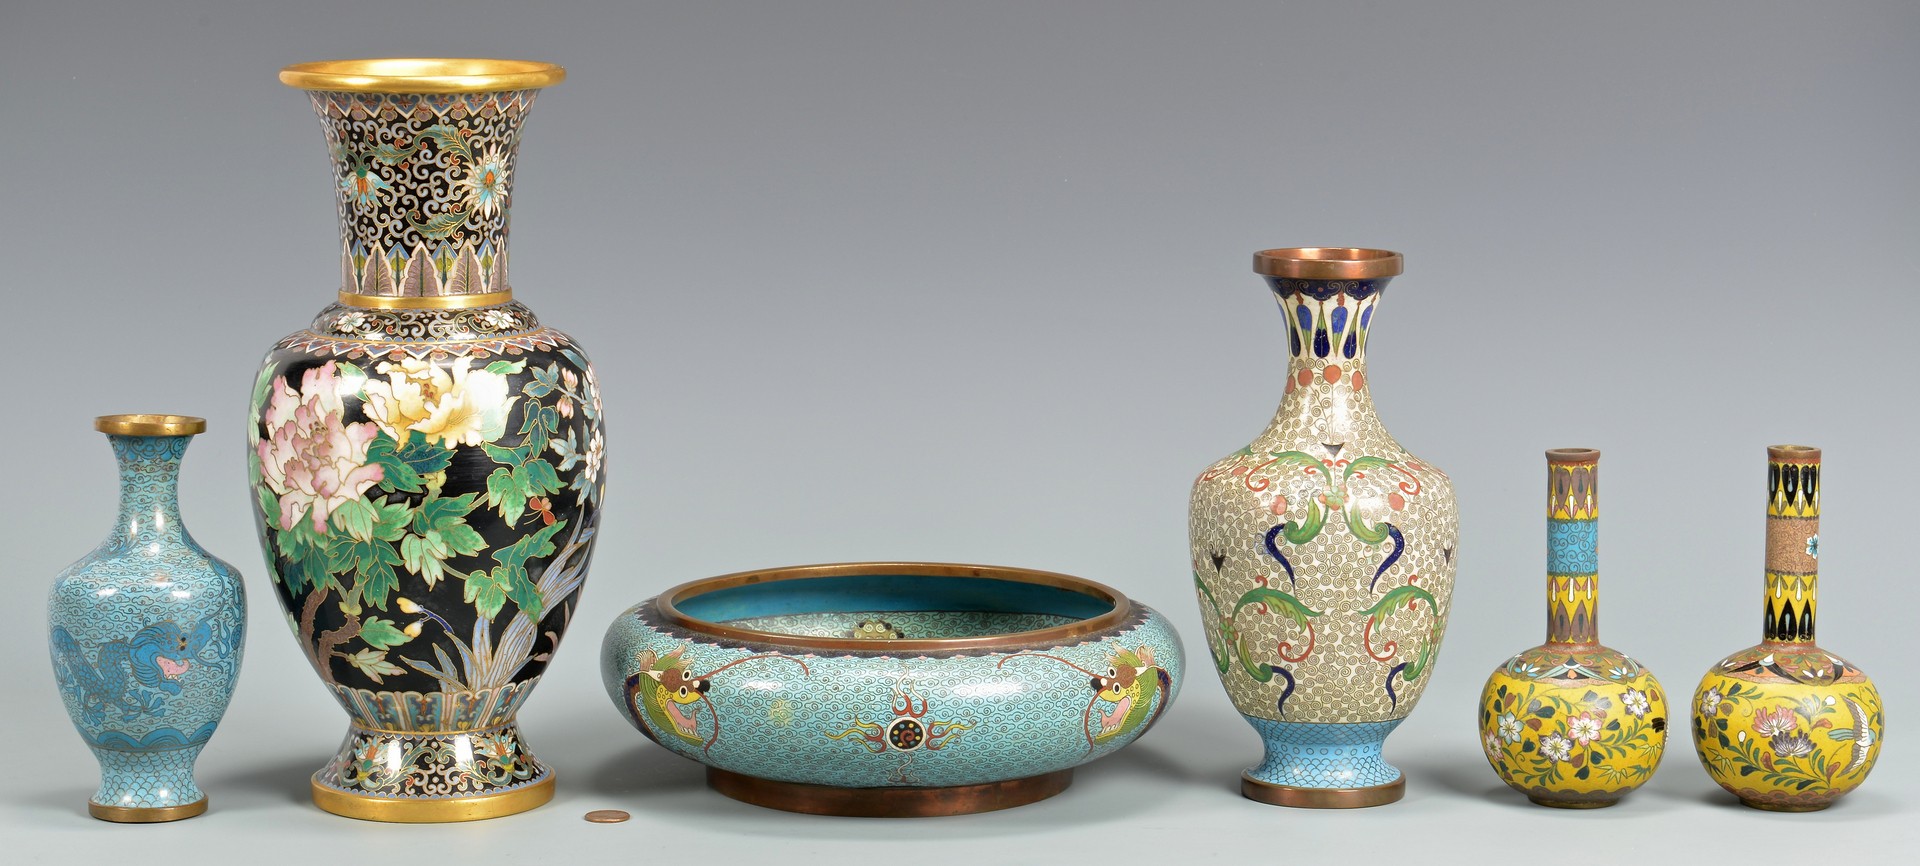 Lot 754: Group Chinese Porcelain & Cloisonne Items, 8 total